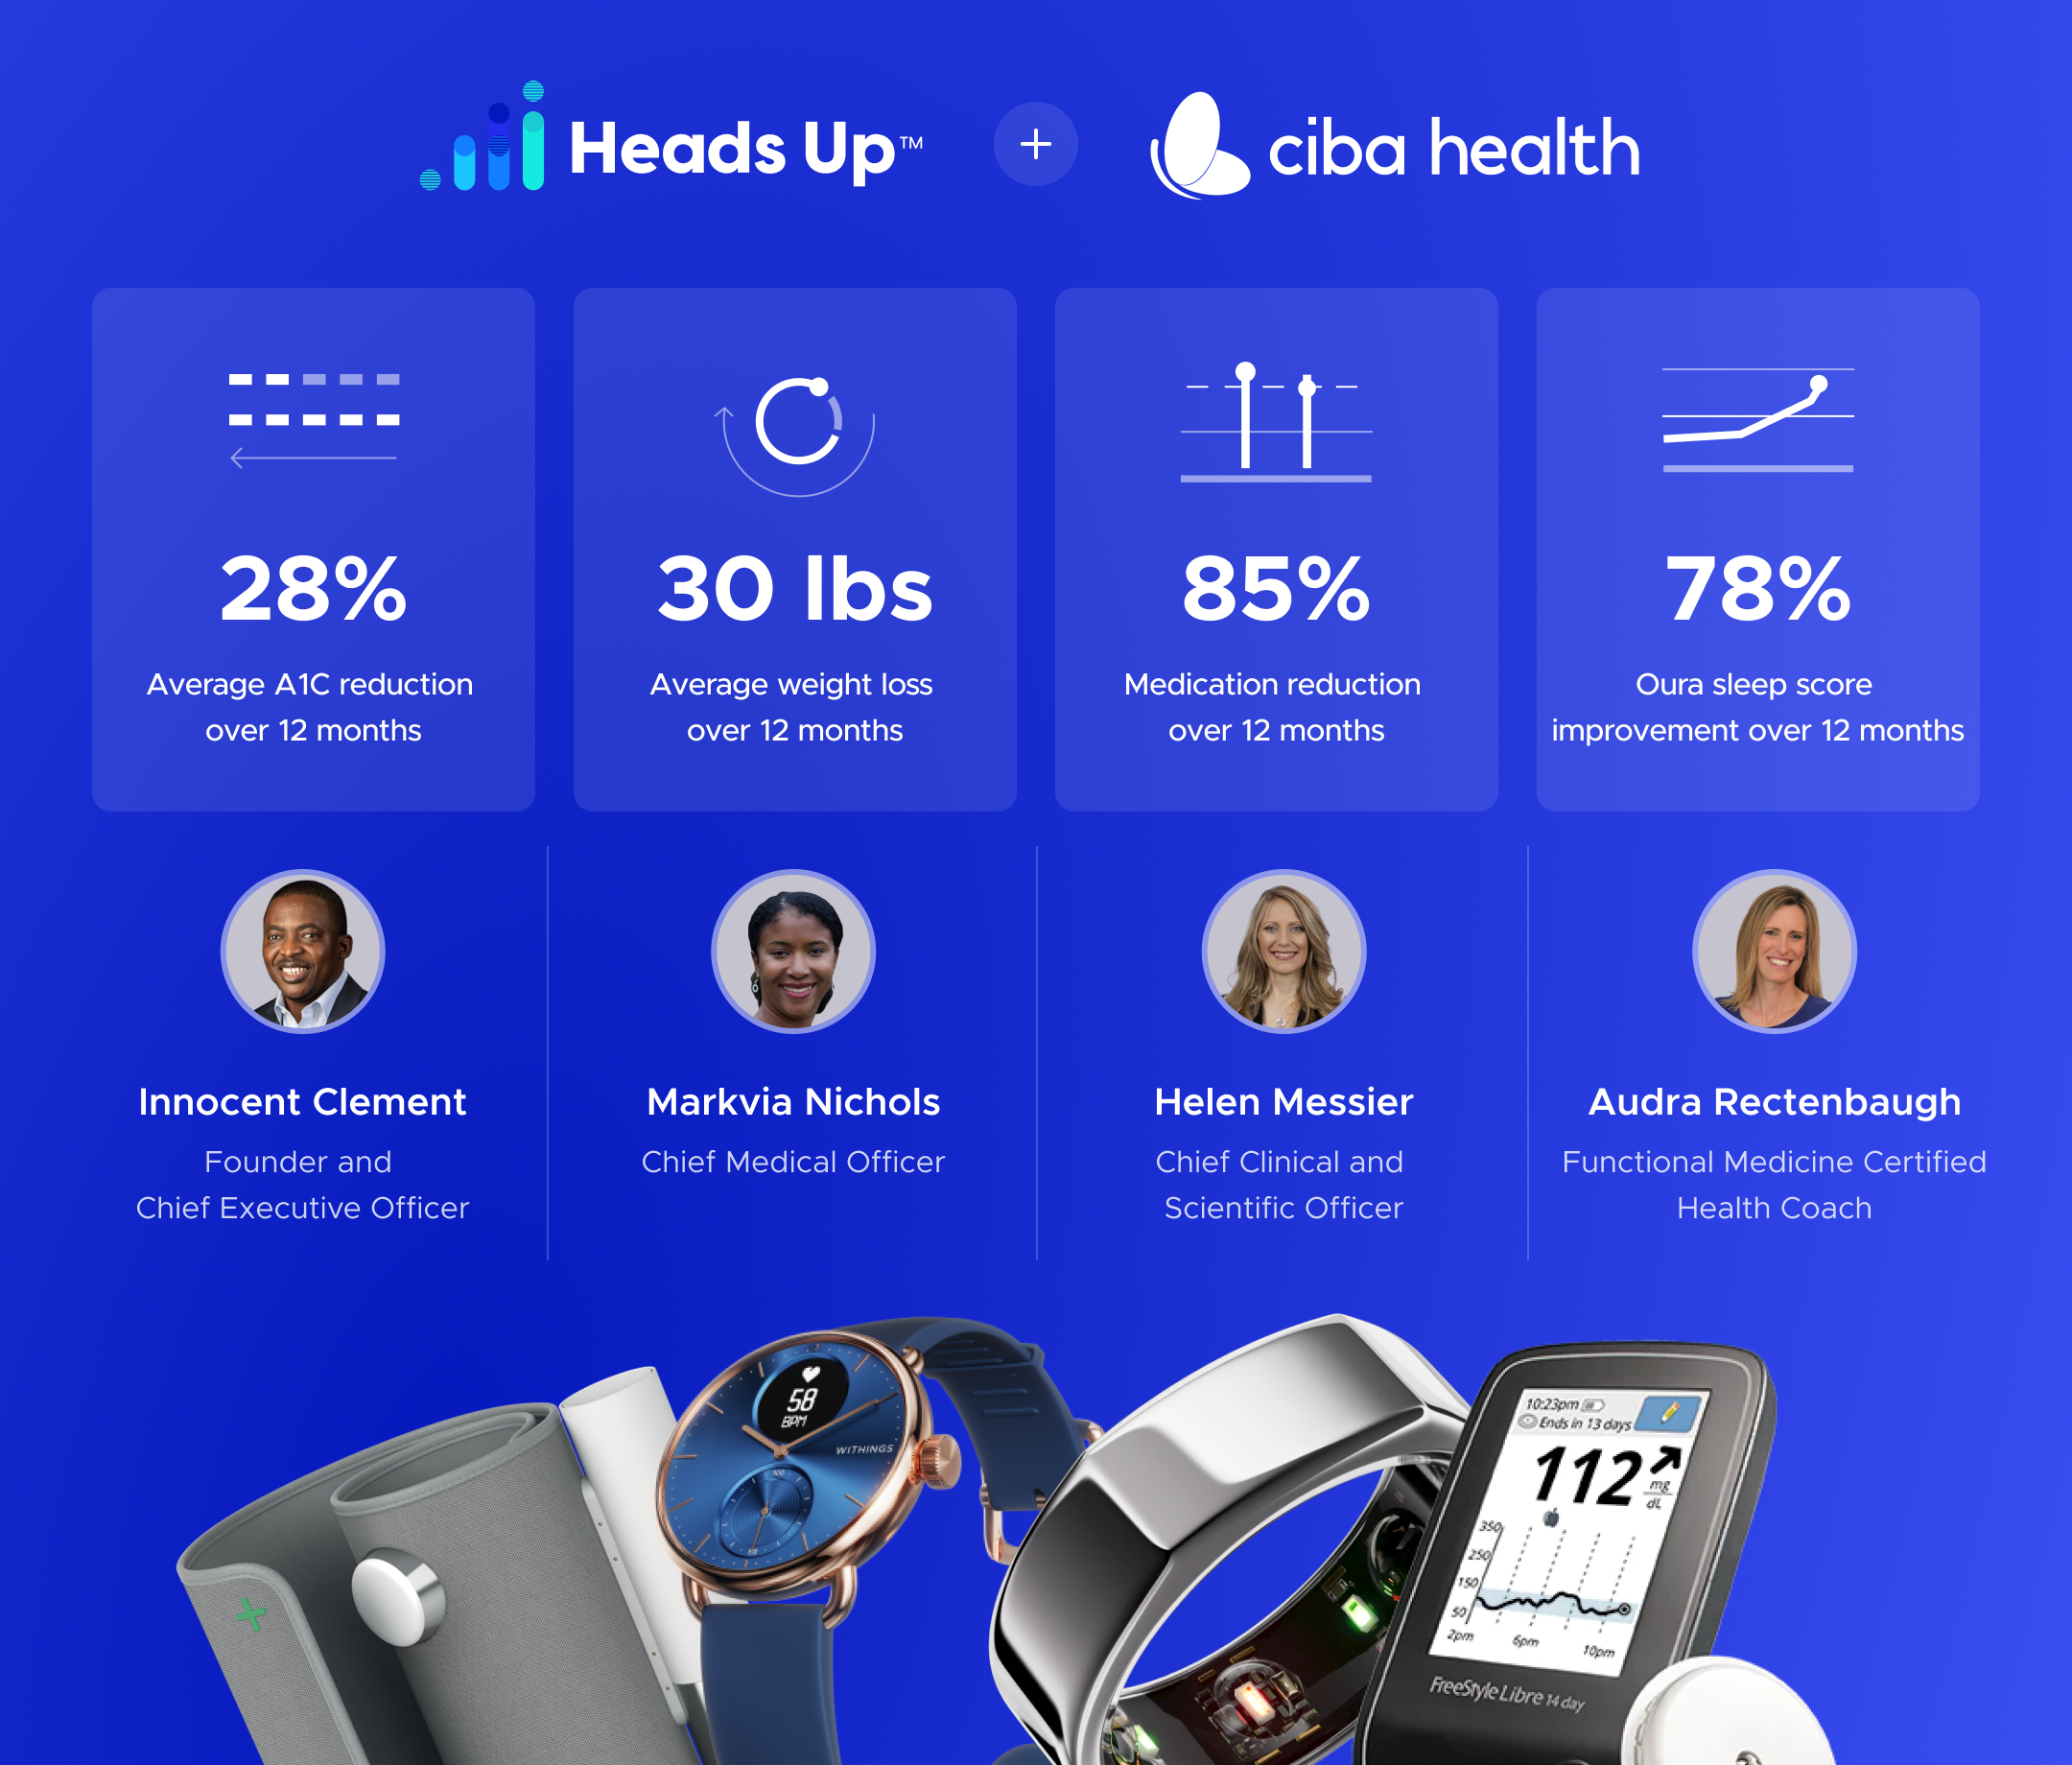 BREAKTHROUGH IN DIGITAL HEALTH: WITHINGS HEALTH SOLUTIONS LAUNCHES